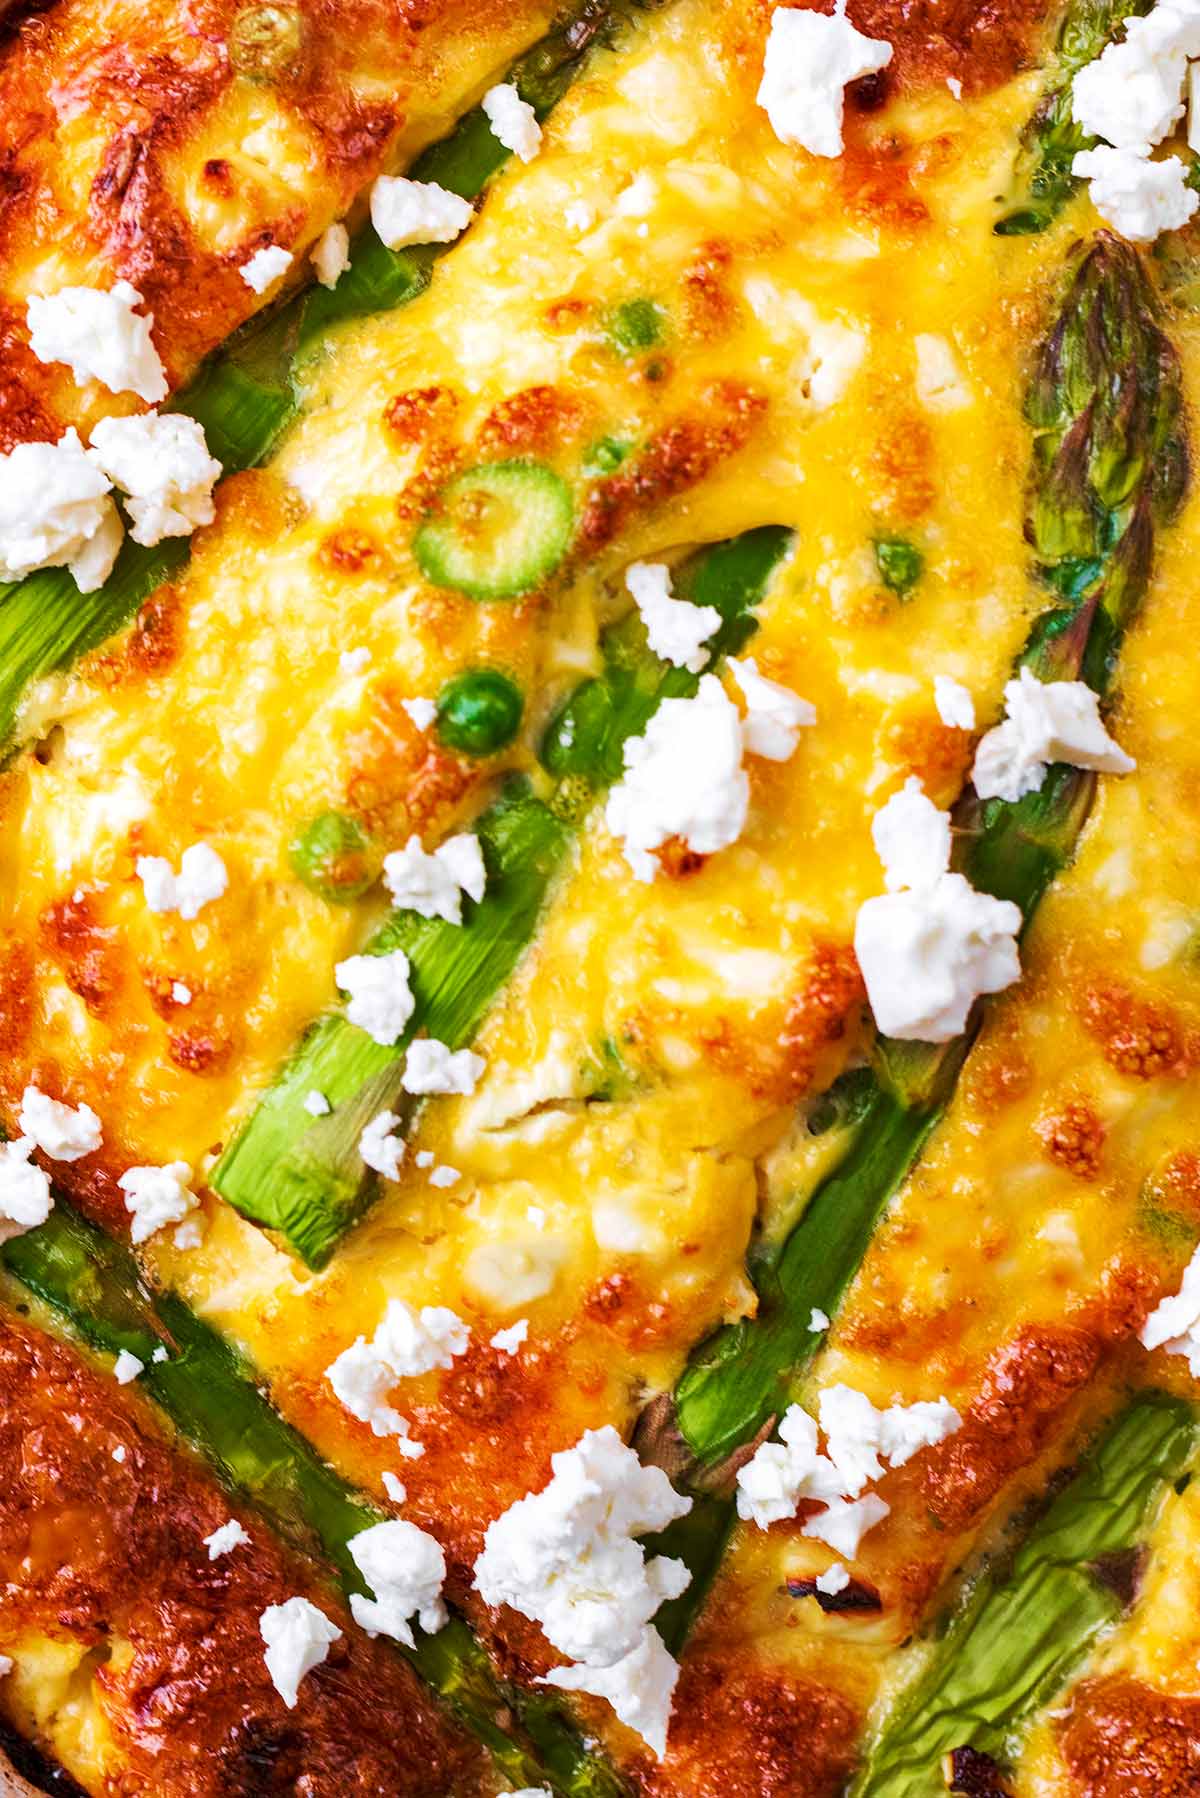 Asparagus spears, peas and feta cheese baked into egg.